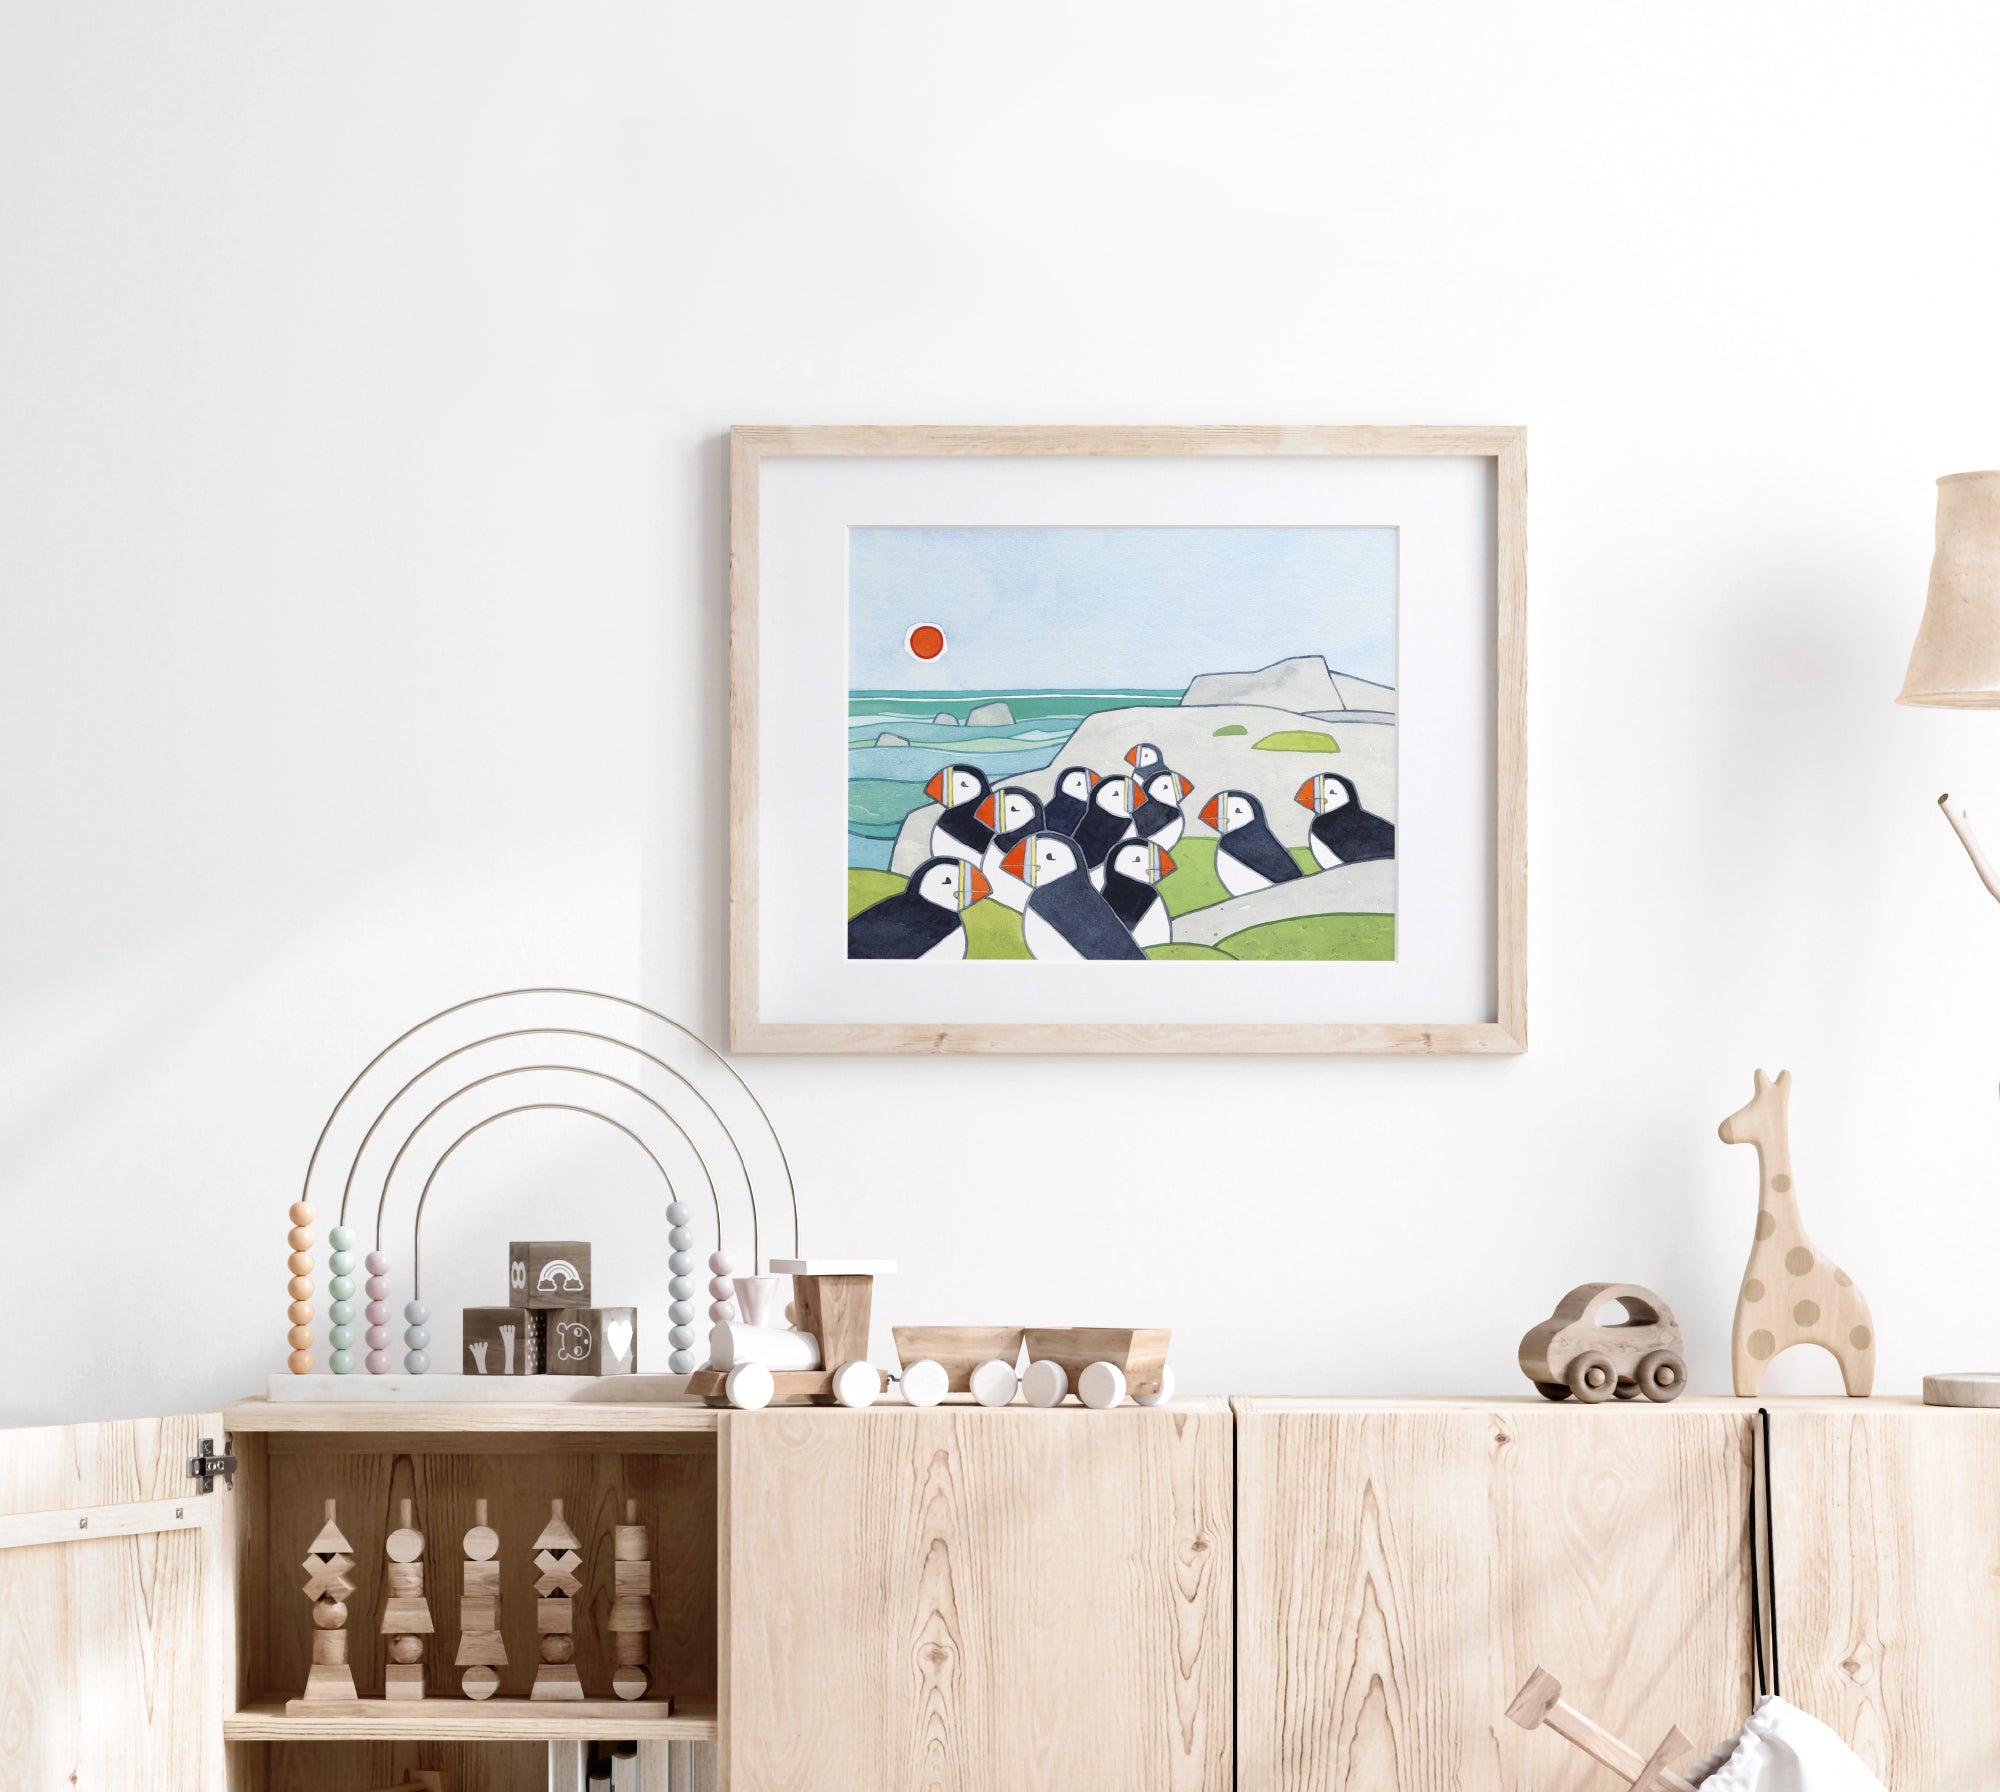 Puffin Colony Art Print, Whimsical Bird Illustration Wall Decor, Puffin Rock